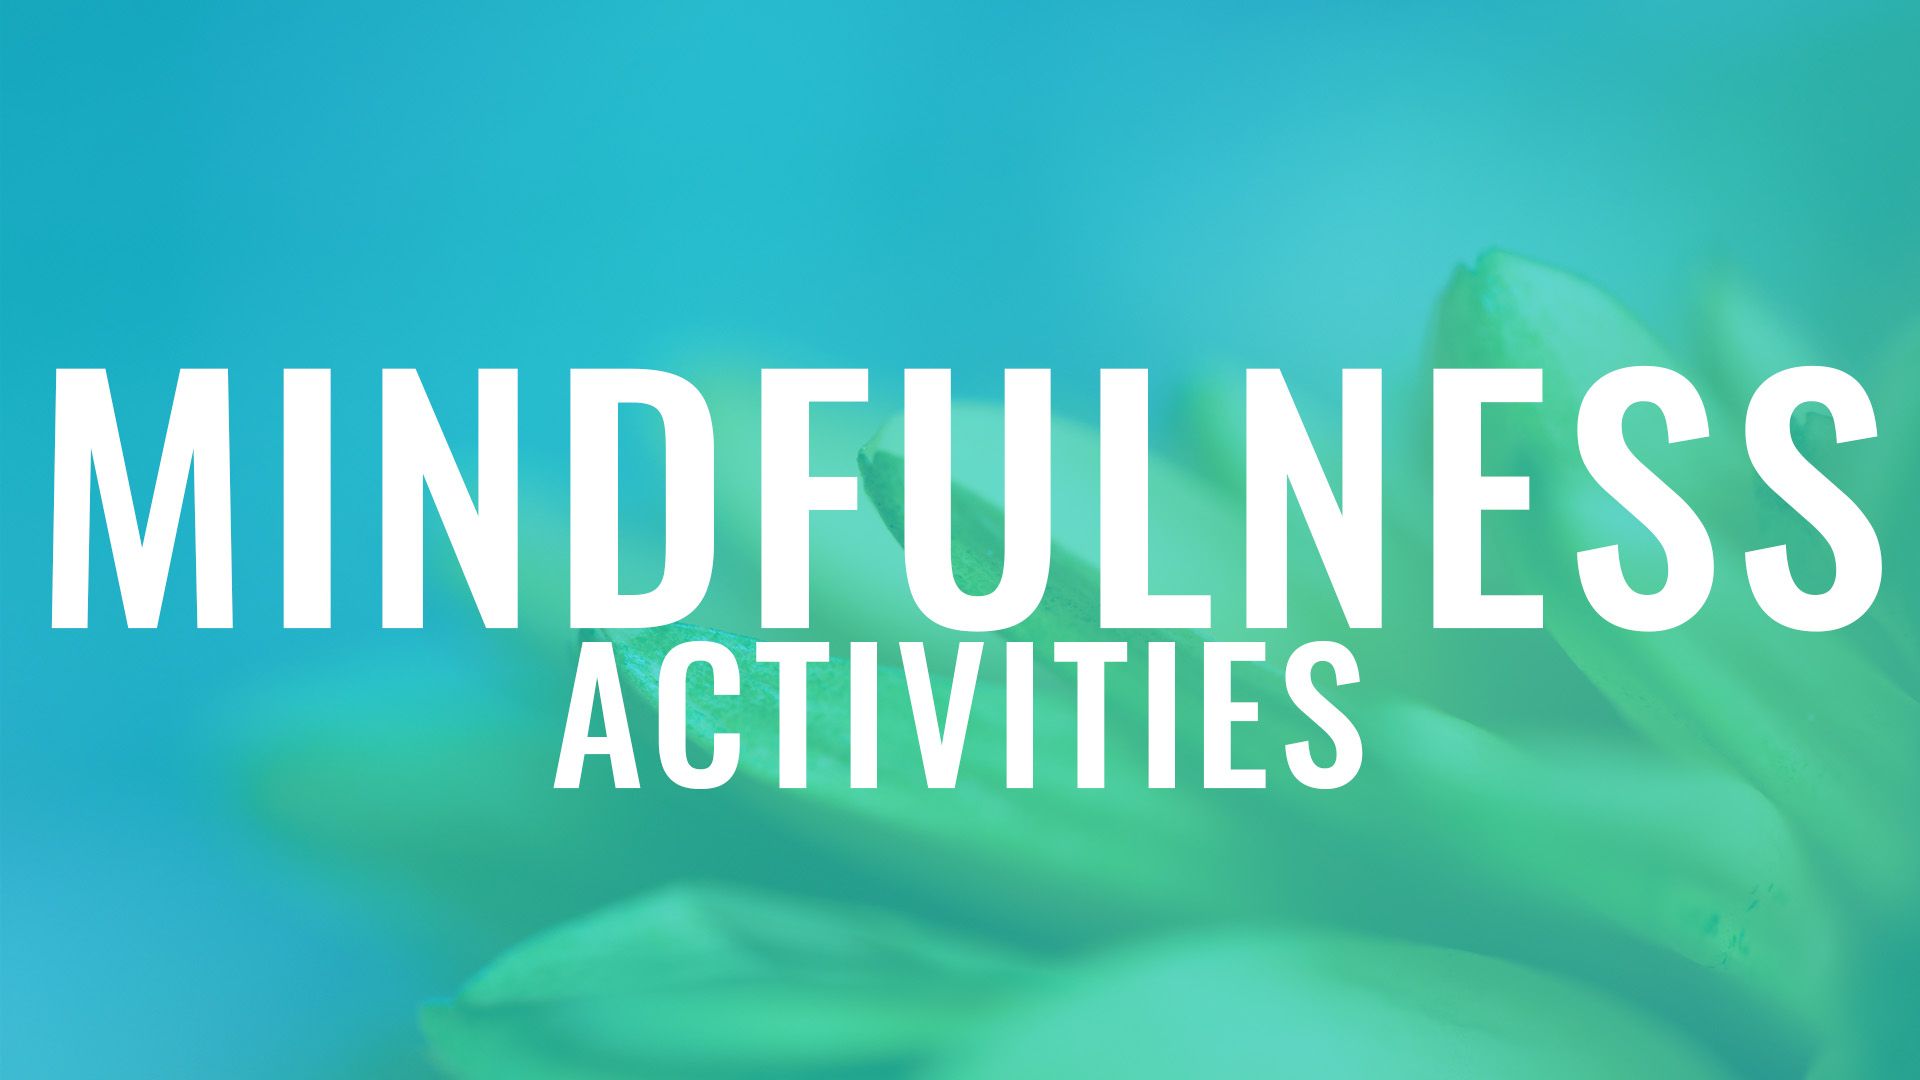 Children's mindfulness activities with Well Ed Wellbeing Program for Schools